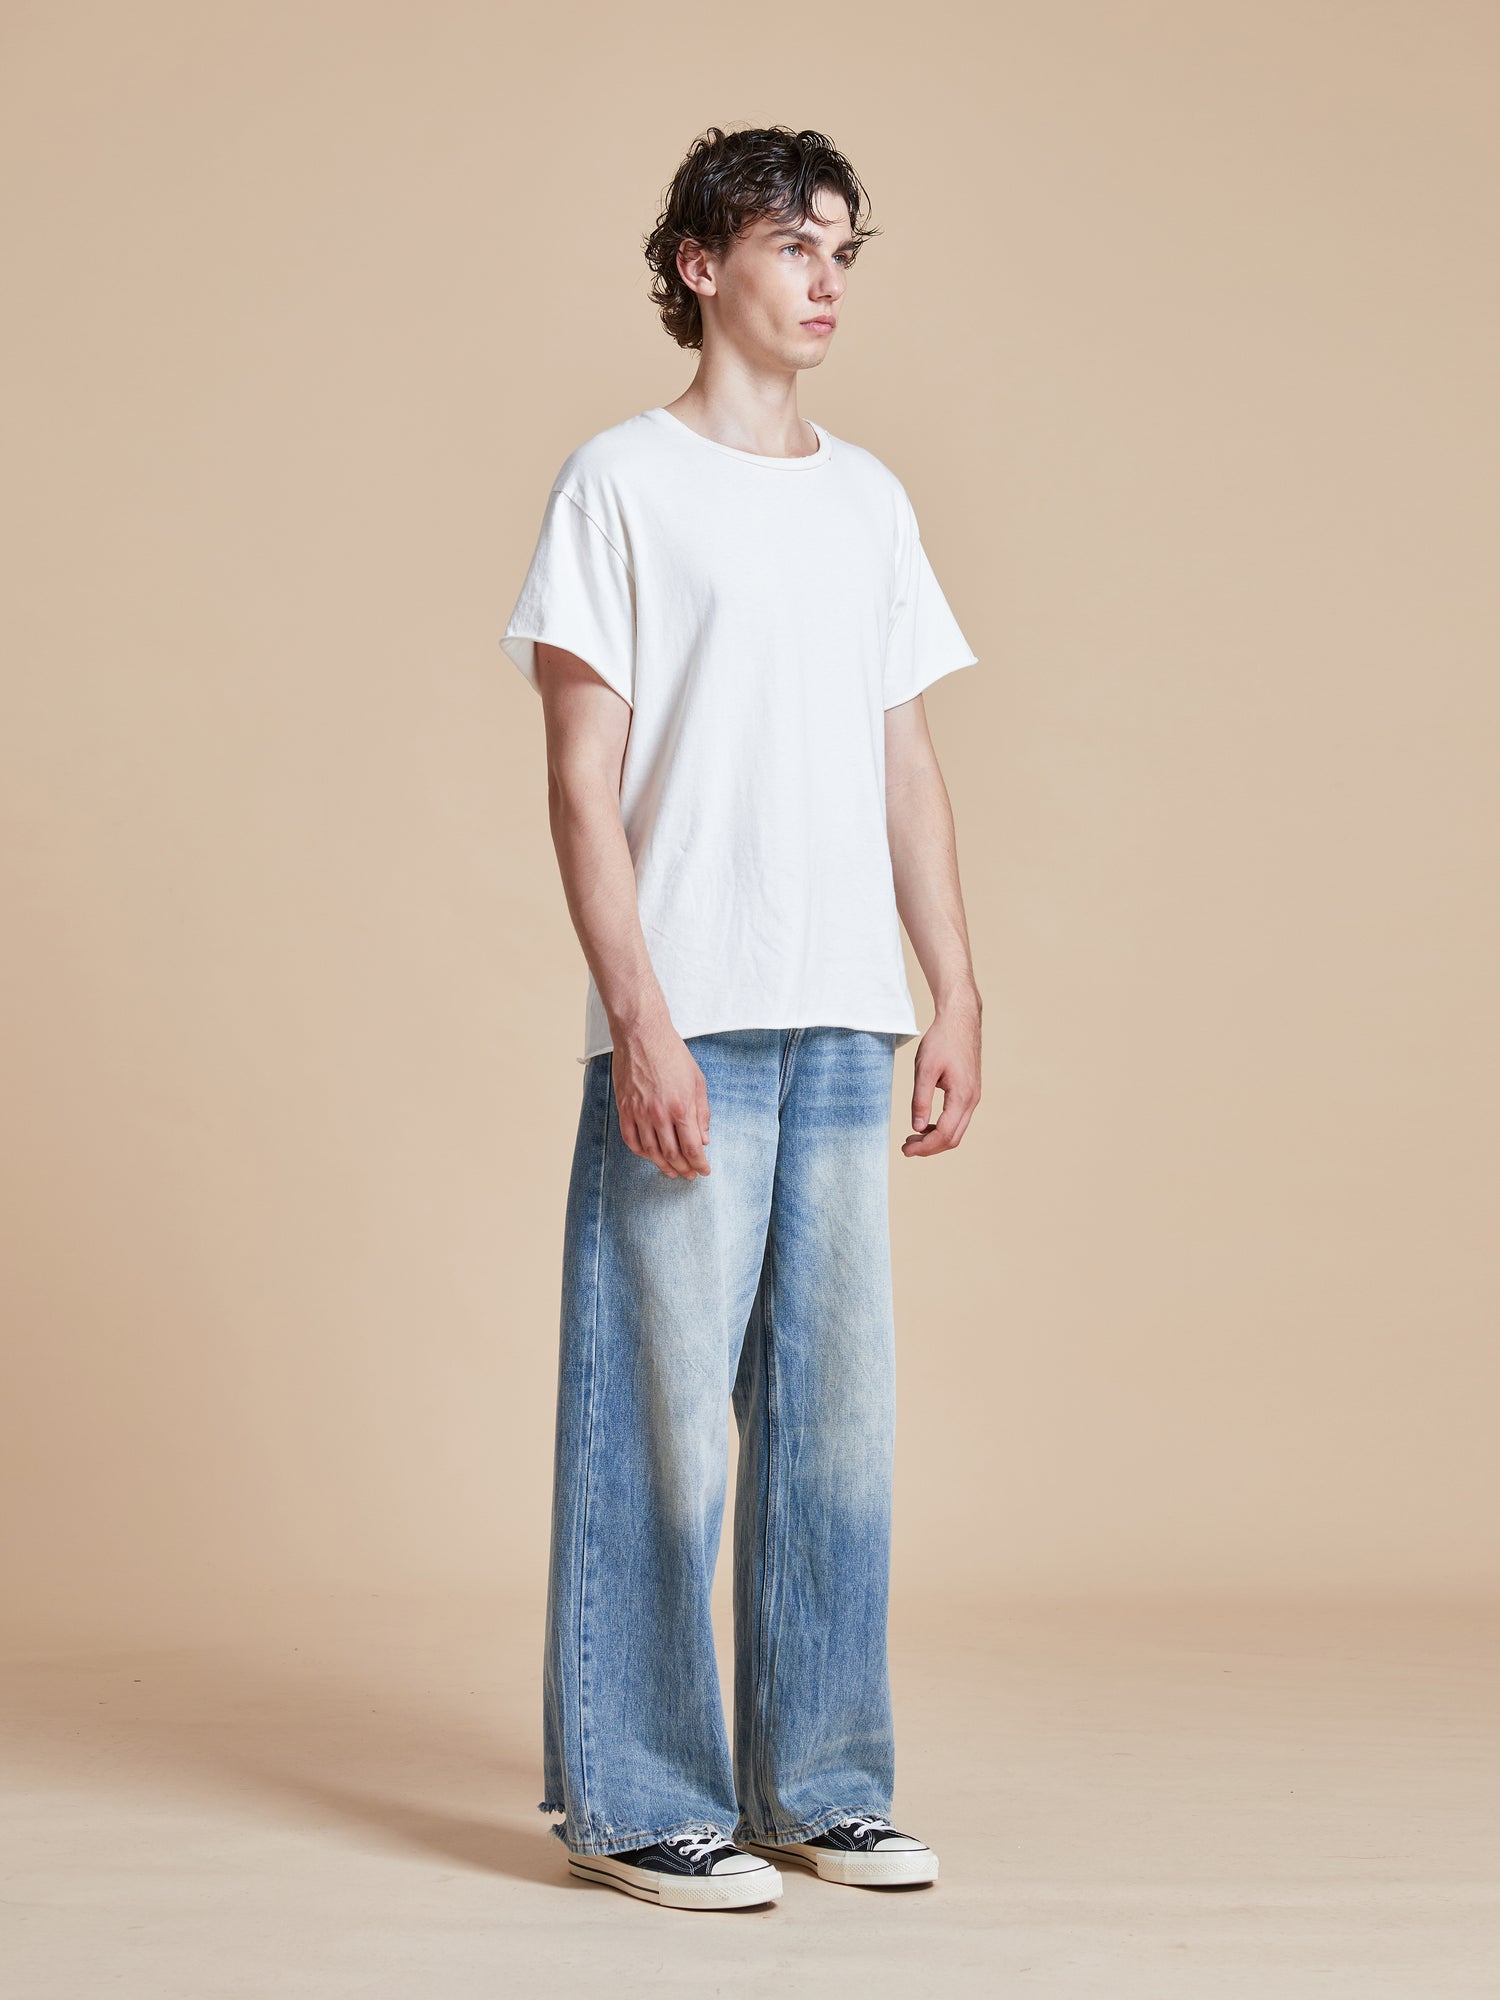 A man wearing a white t-shirt and Found Lacy Baggy Jeans Blue.